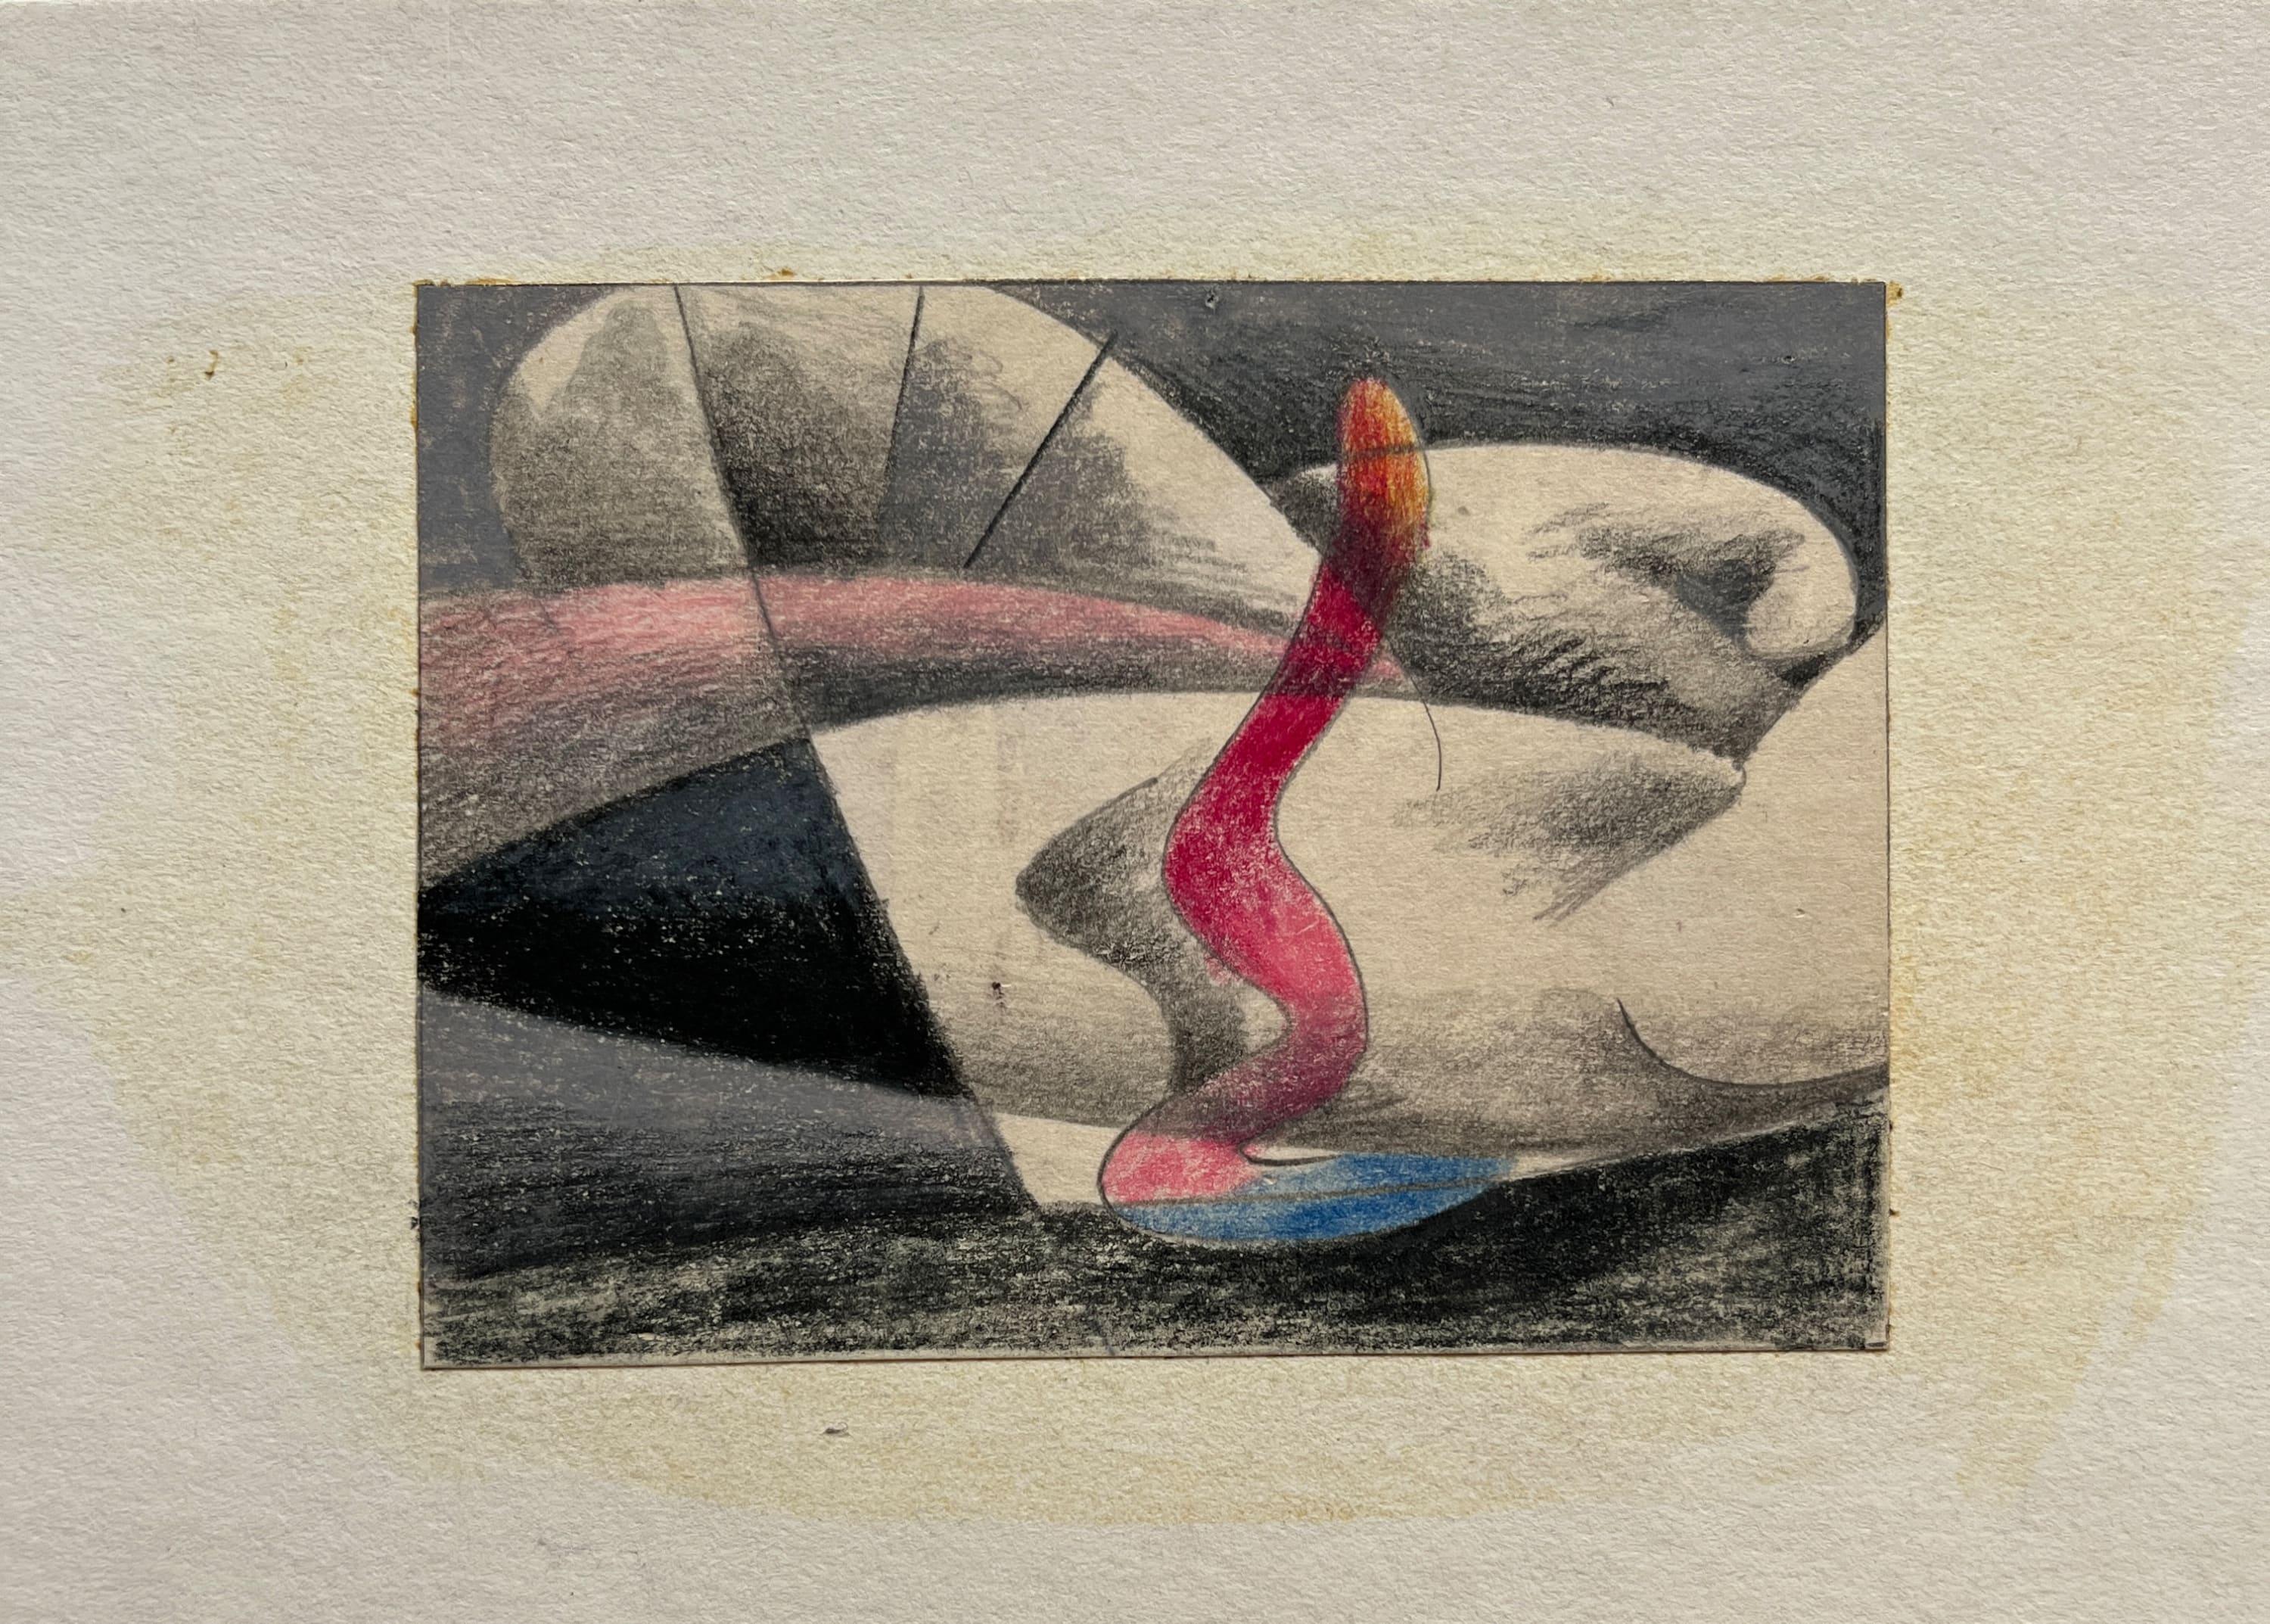 Mixed Media-Gemälde „Micro Biomorphic Abstract Drawing II“, 1990er Jahre im Angebot 2